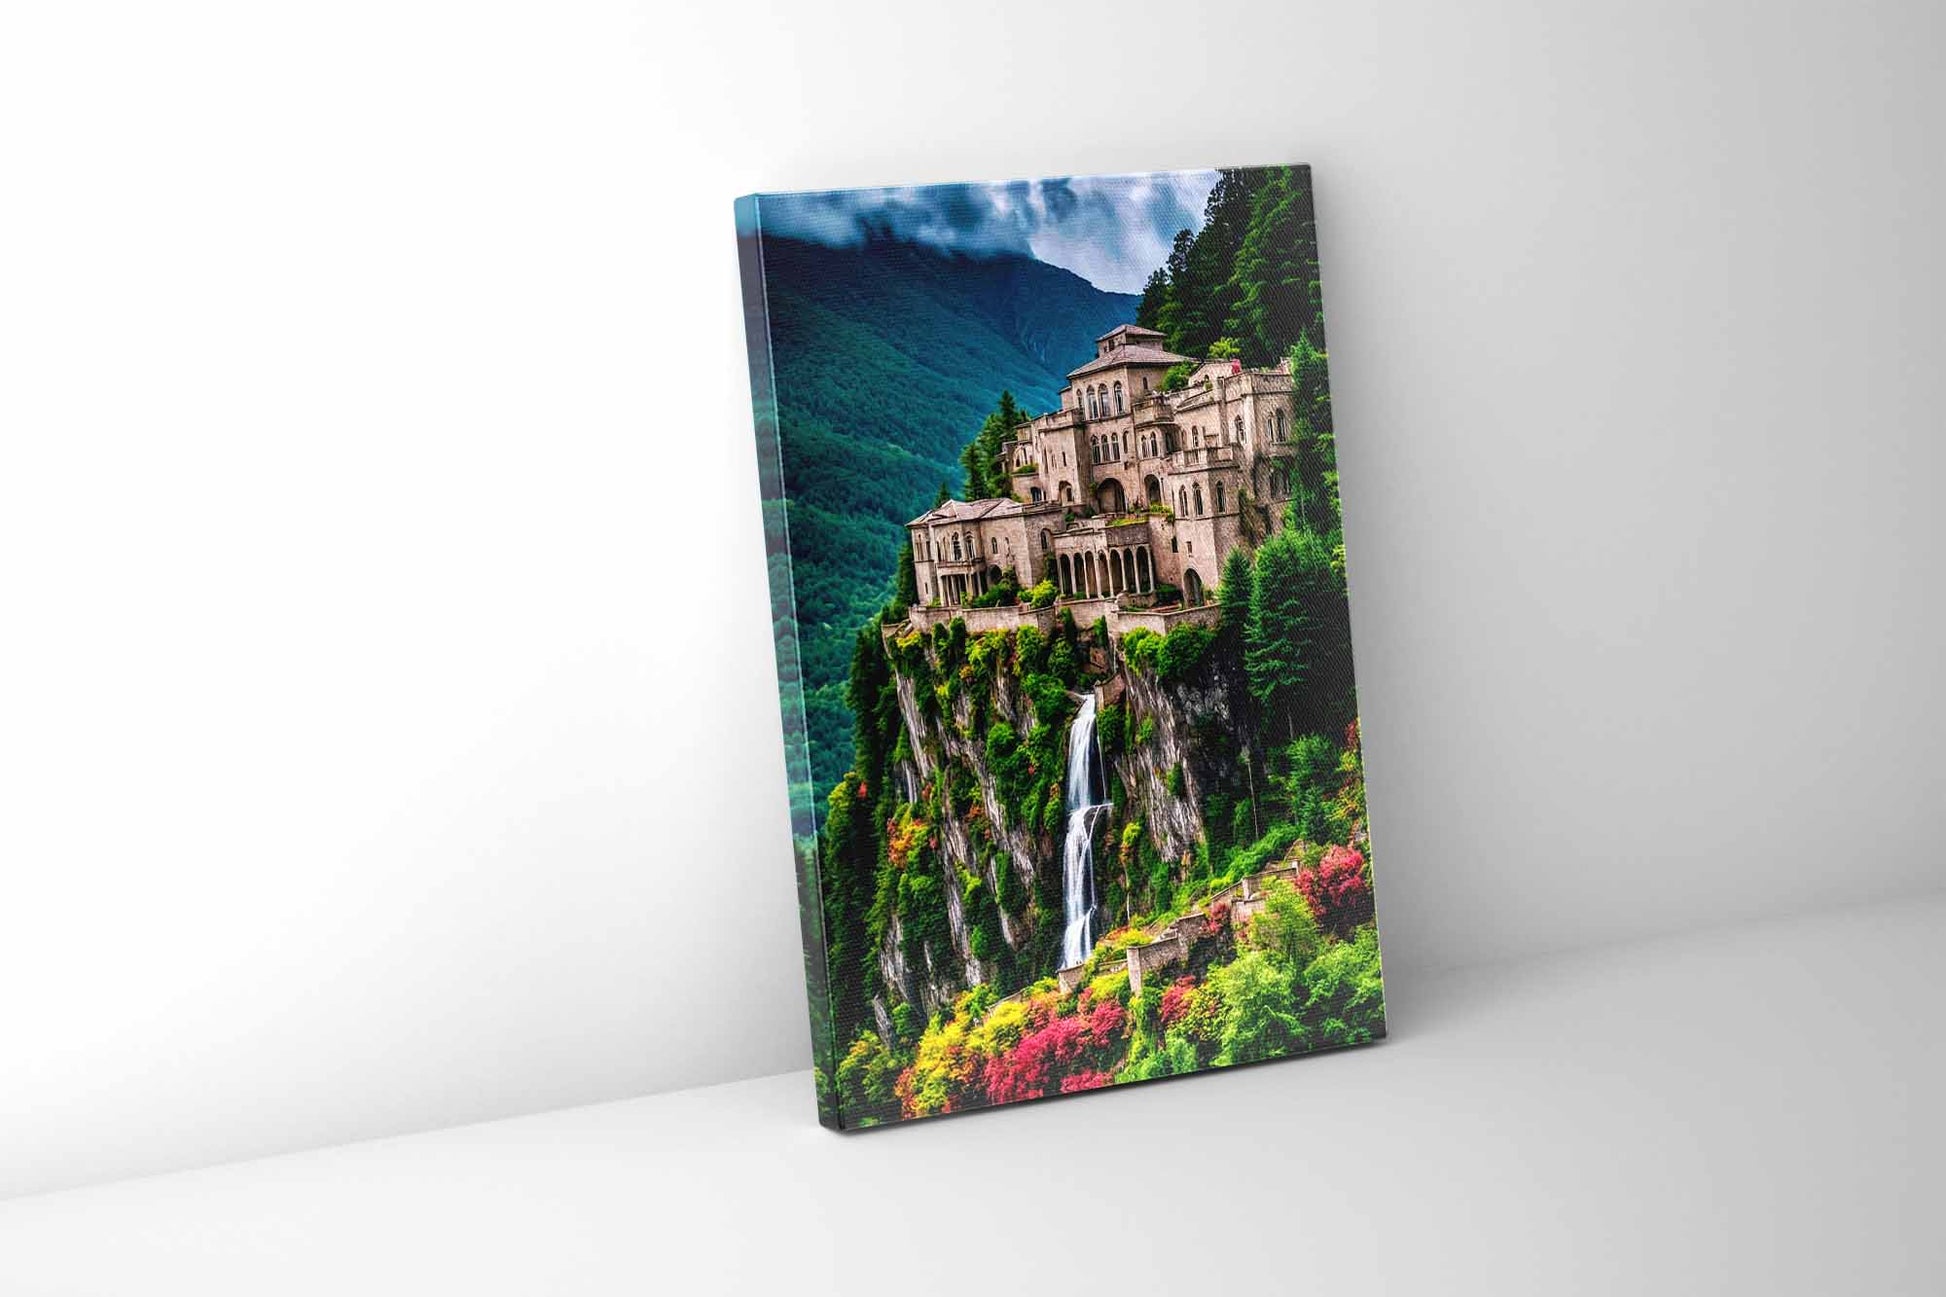 Fine Art Canvas Print with out frame. "Living Dream" the image shows an imposing castle on the edge of a cliff, also below the castle there is a waterfall and surrounding trees that contrast with the incredible view.